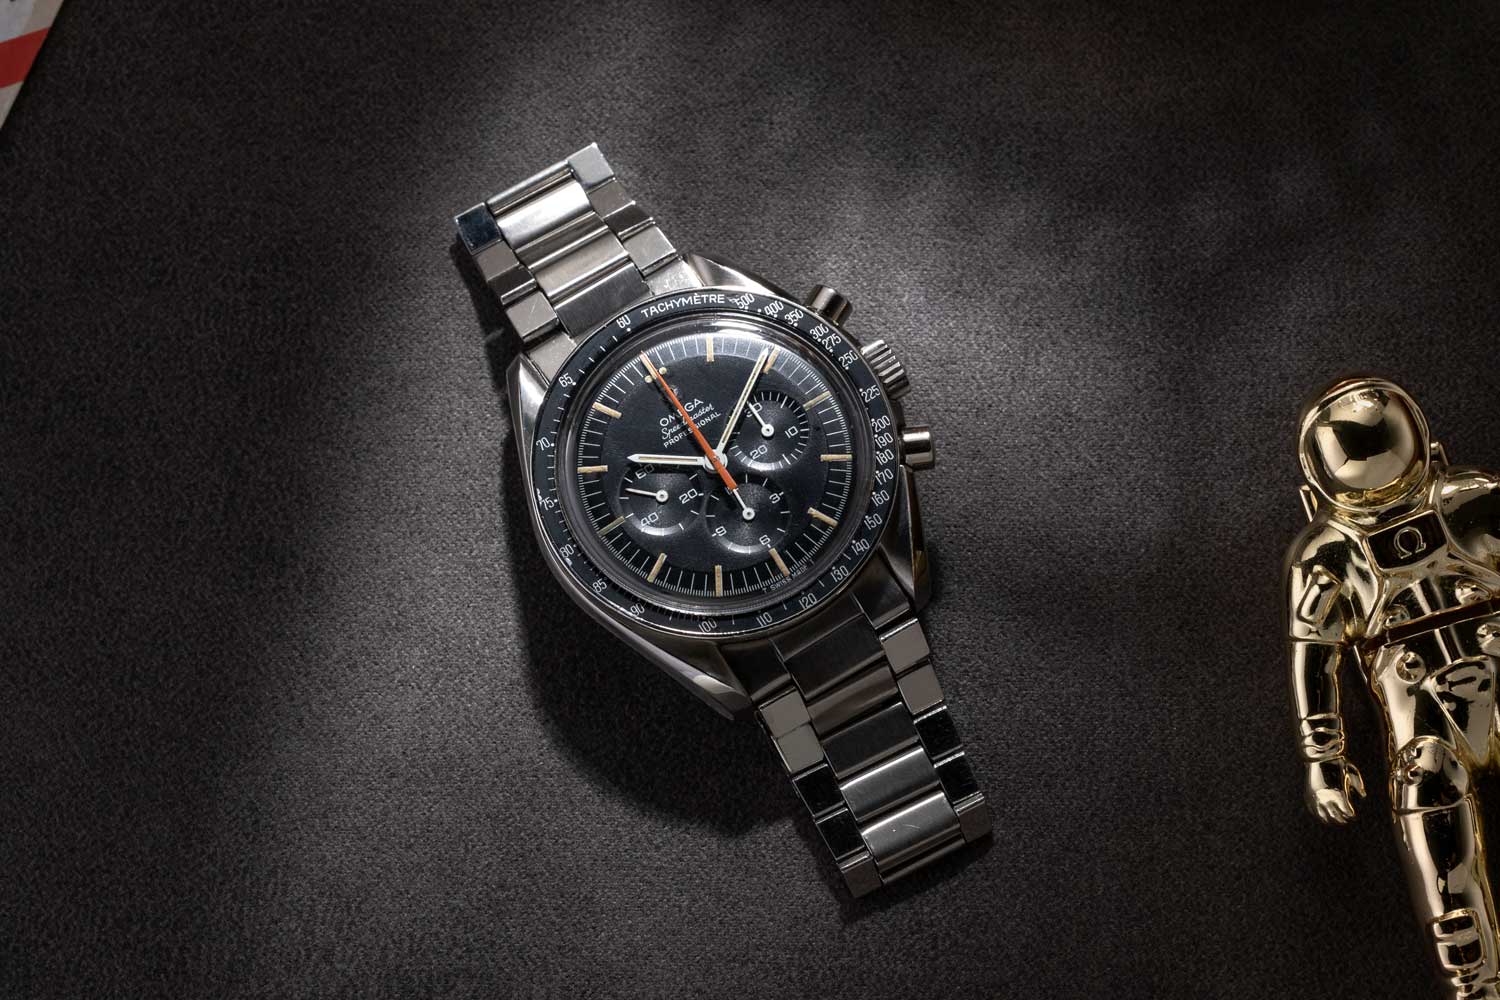 The 1968 Speedmaster ref. ST 145.012-67 with the peculiar orange chrono hand that collectors have nicknamed: The Ultraman (©Revolution)